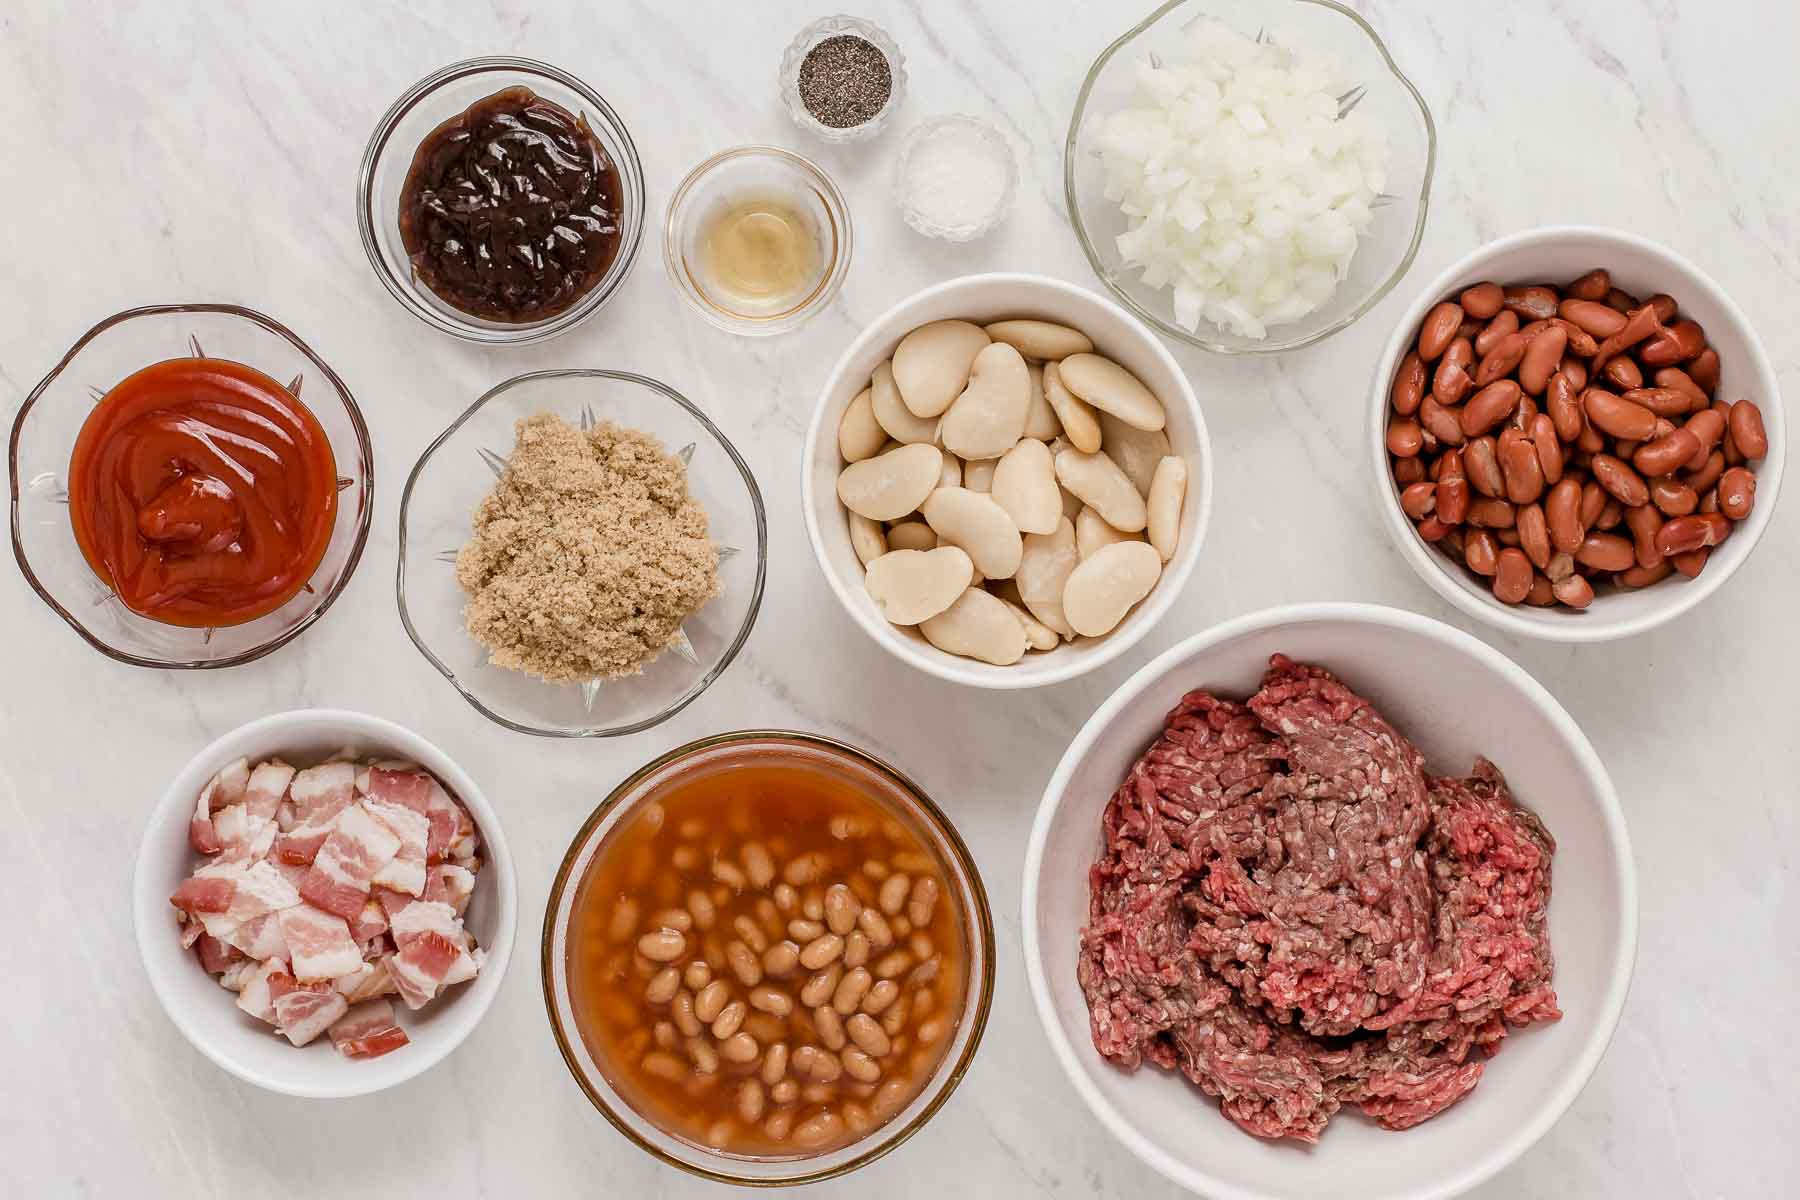 Ingredients for crockpot calico beans in small bowls on white table.